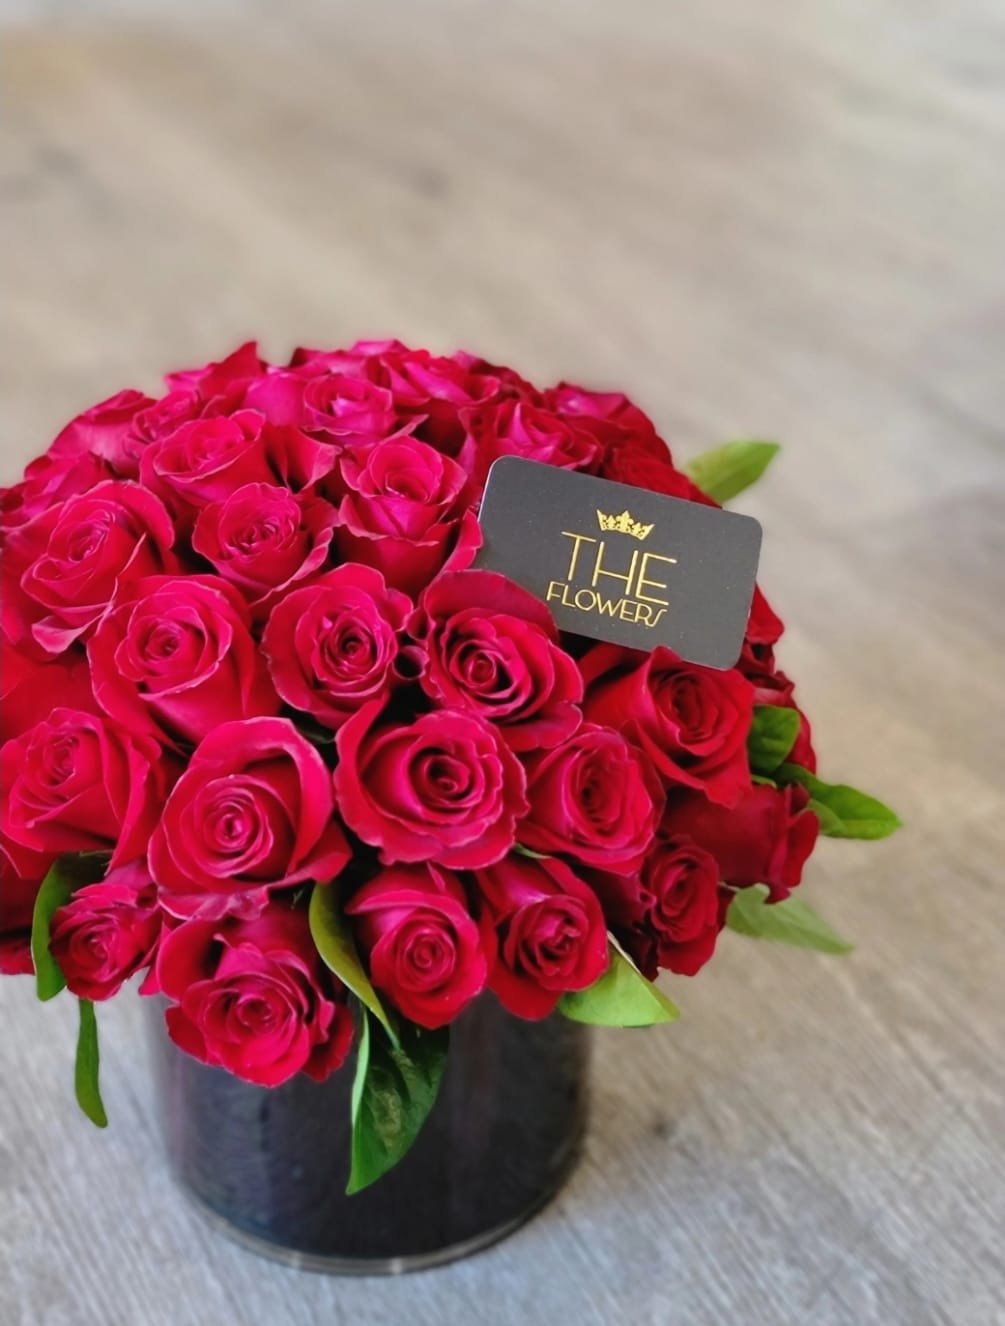 Red roses are recognized queens of the flower world. Passionate and sensual